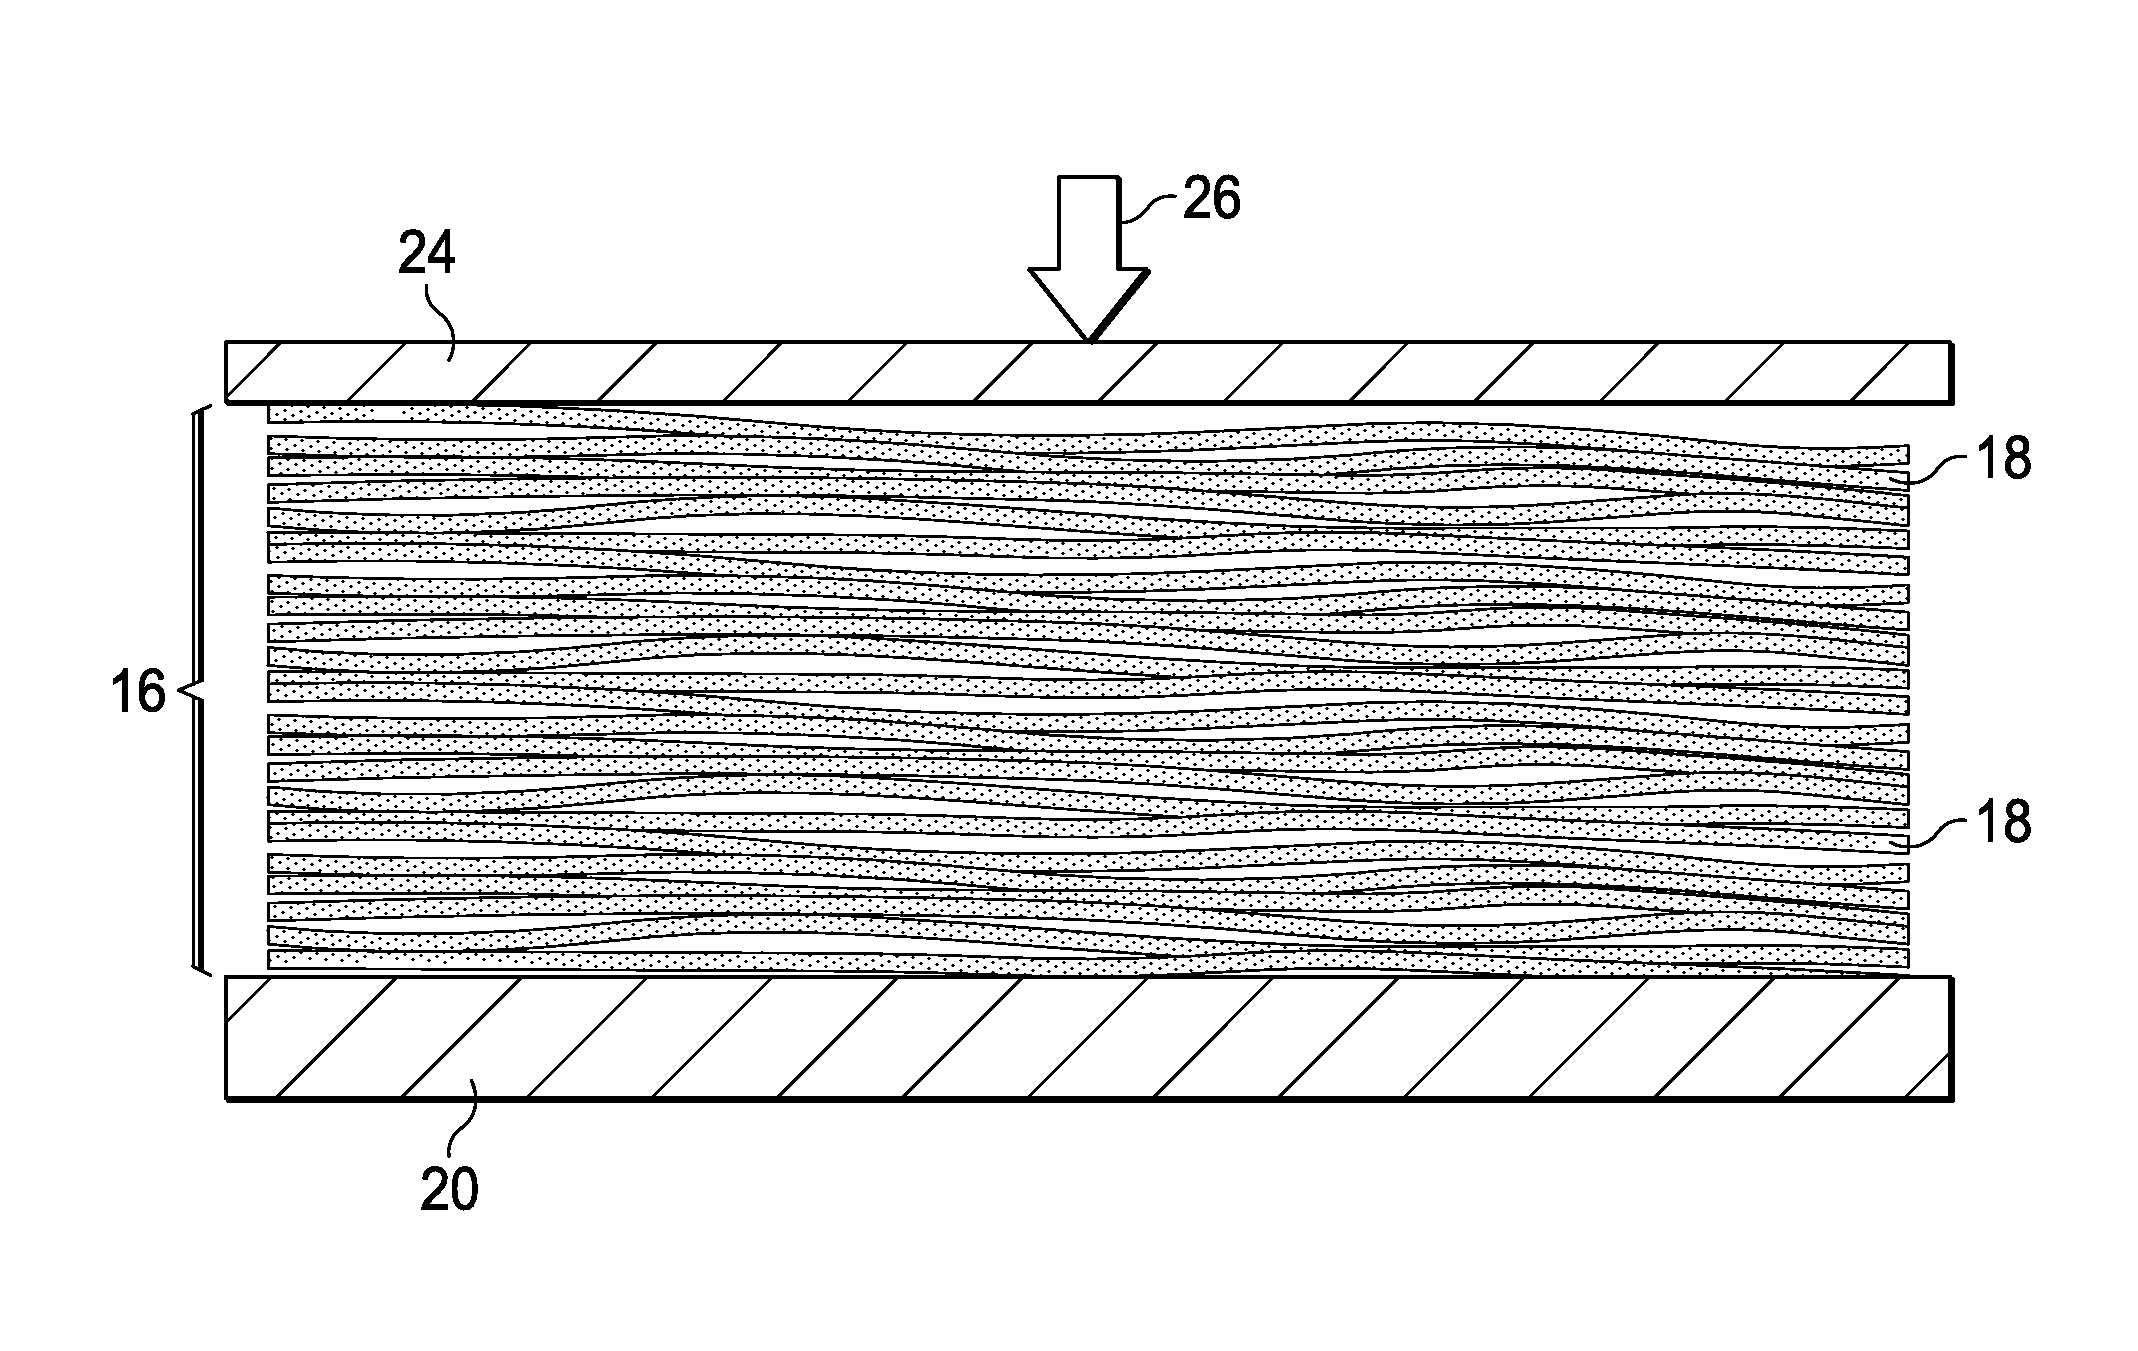 Method and Apparatus for Forming Thick Thermoplastic Composite Structures